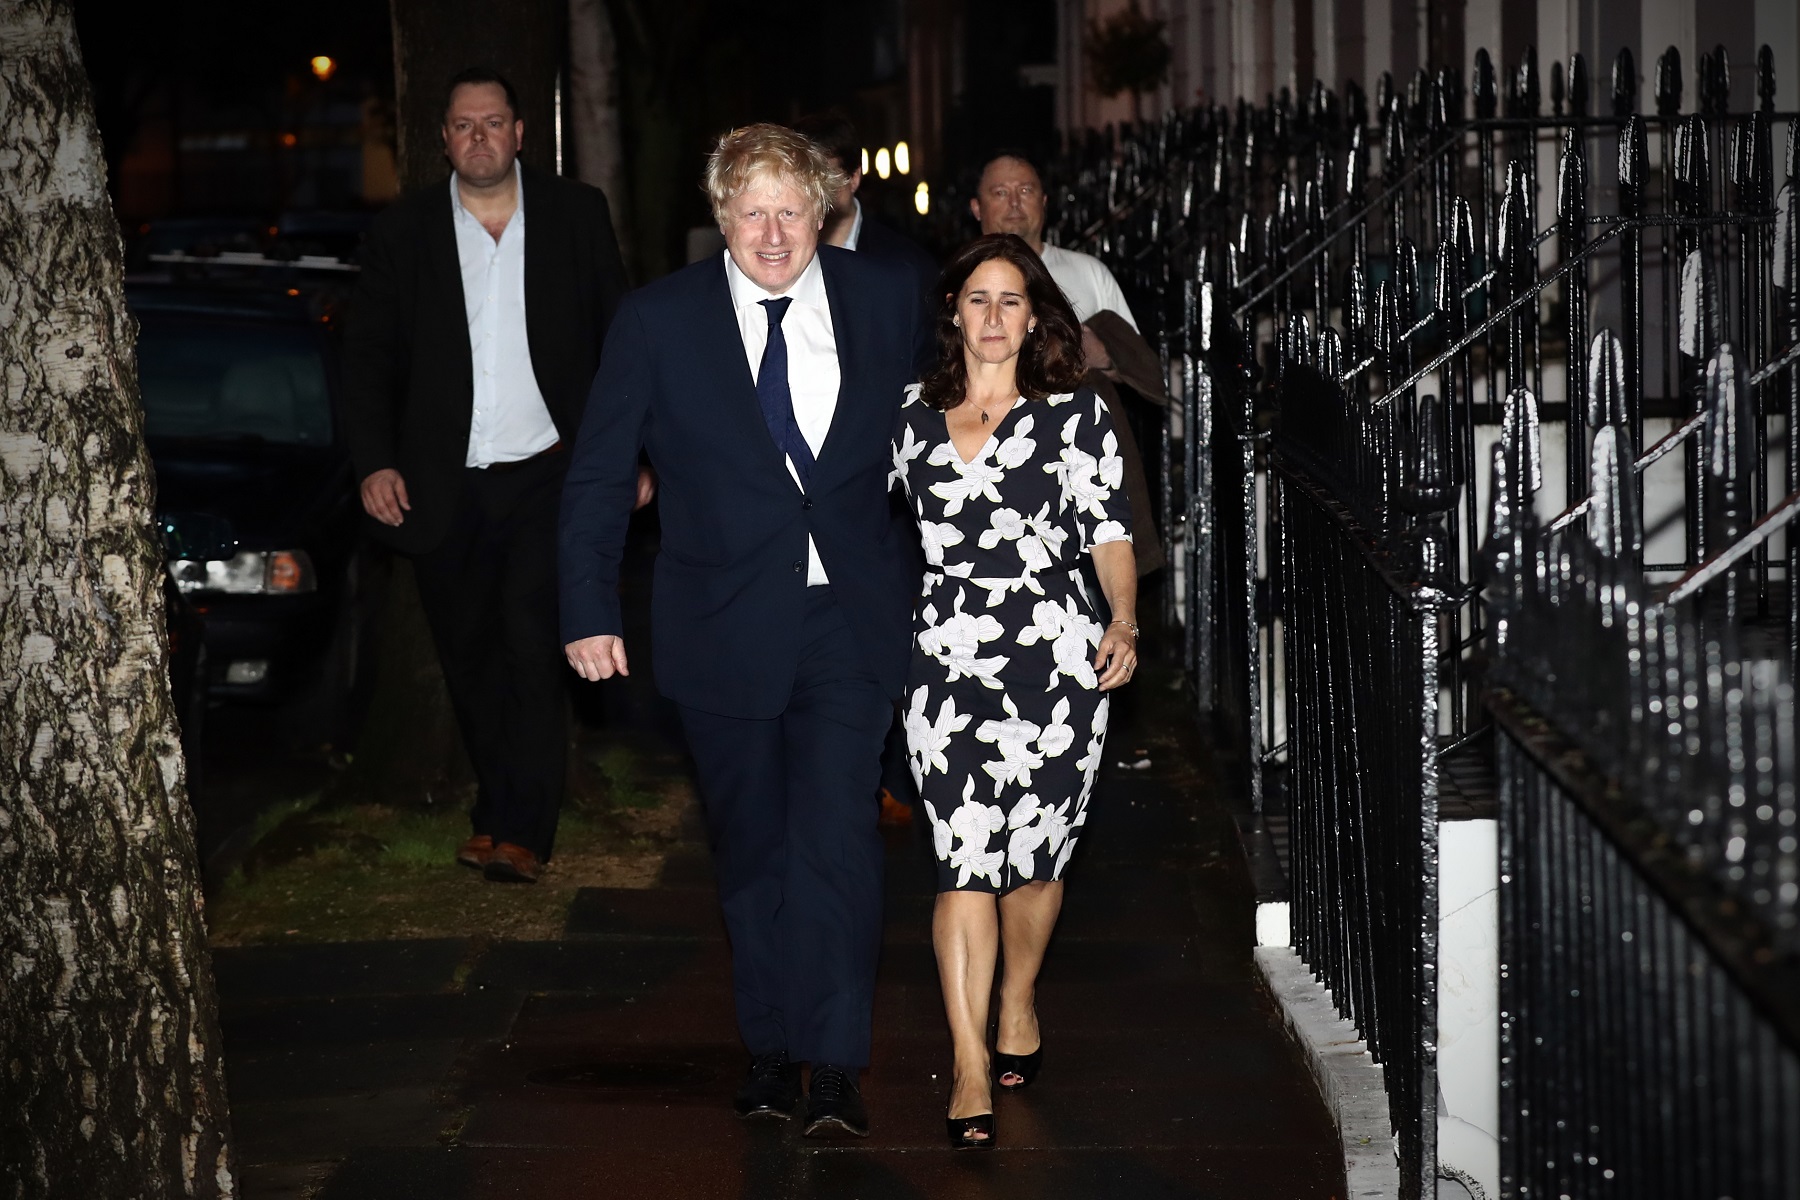 UNSPECIFIED, UNITED KINGDOM - JUNE 23:  Boris Johnson and his wife Marina Wheeler leave the polling station on June 23, 2016 in London, United Kingdom. The United Kingdom has gone to the polls to decide whether or not the country wishes to remain within the European Union. After a hard fought campaign from both REMAIN and LEAVE the vote is too close to call. A result on the referendum is expected on Friday morning.  (Photo by Carl Court/Getty Images)